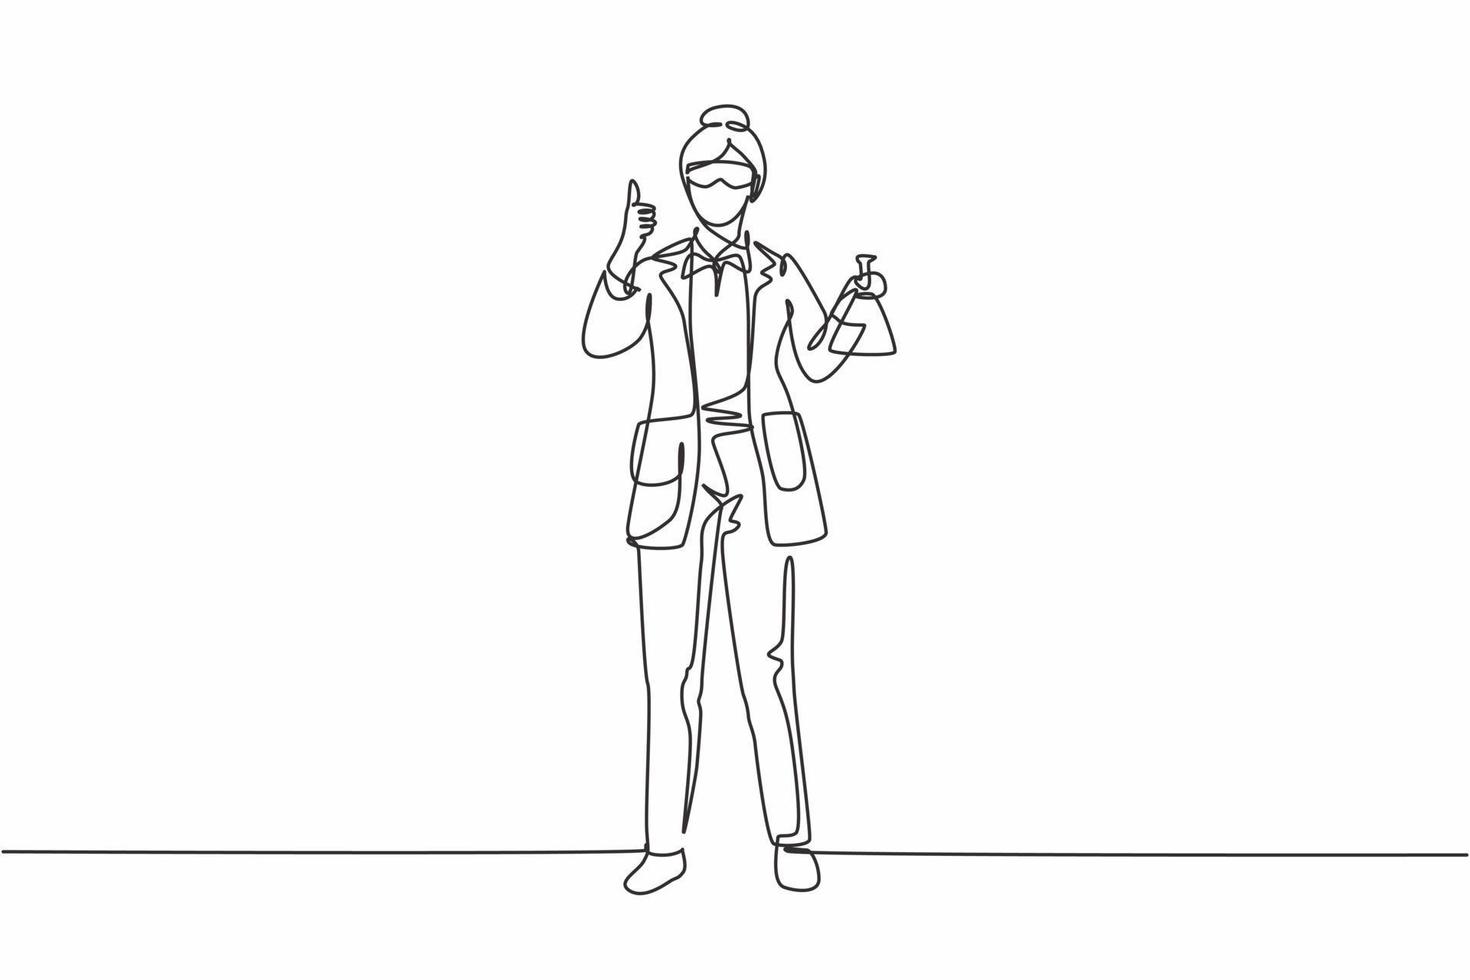 Single continuous line drawing female scientist stands with a thumbs-up gesture and holding a measuring tube filled with a chemical liquid. Dynamic one line draw graphic design vector illustration